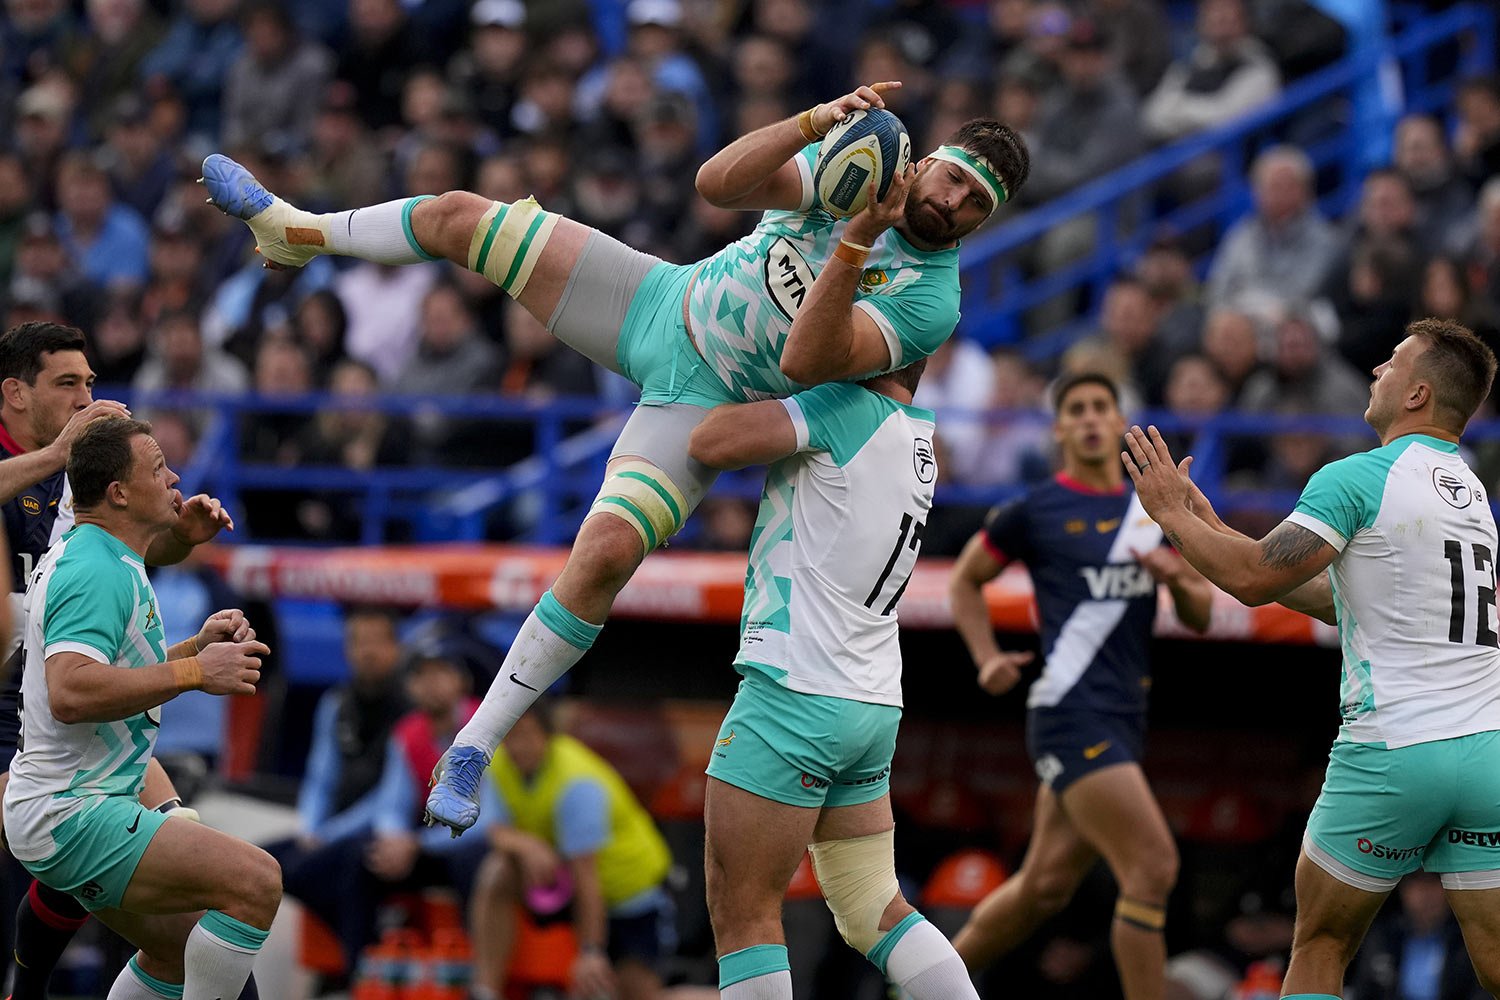  South Africa's Jean Kleyn holds the ball during a rugby test match against Argentina in Buenos Aires, Argentina, Aug. 5, 2023. (AP Photo/Natacha Pisarenko) 